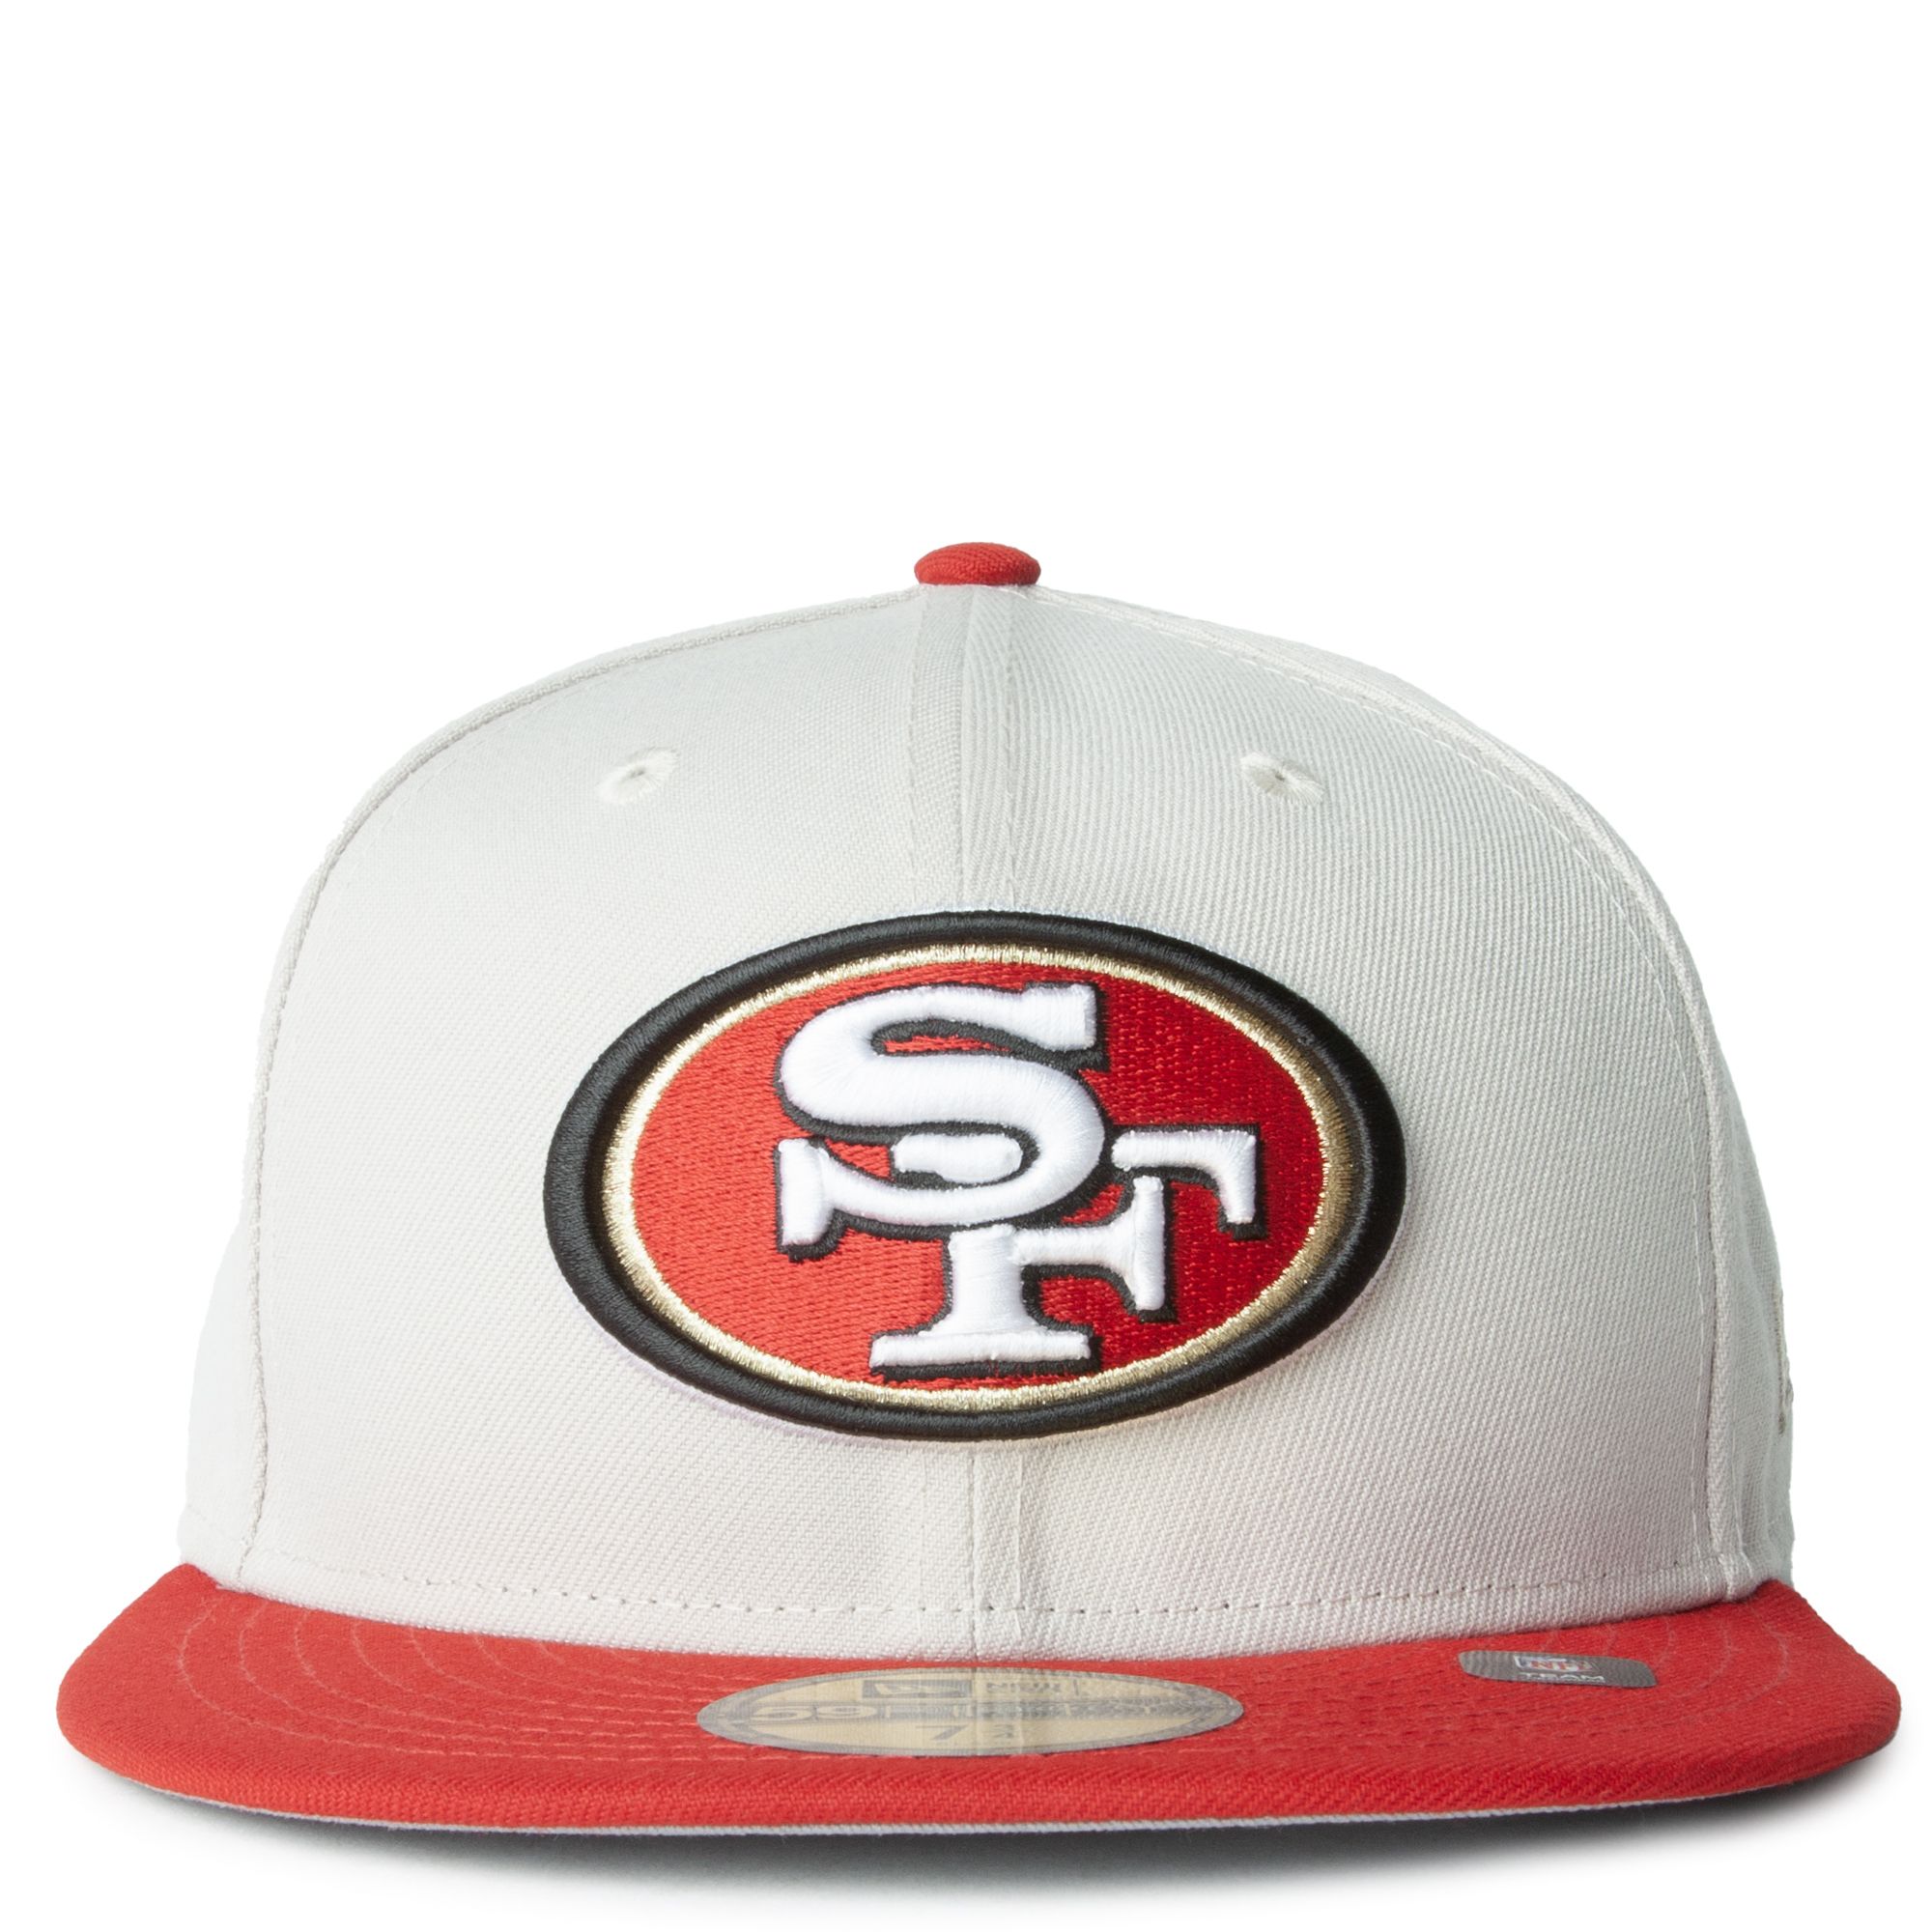 New Era Caps San Francisco 49ers Fitted White/Red